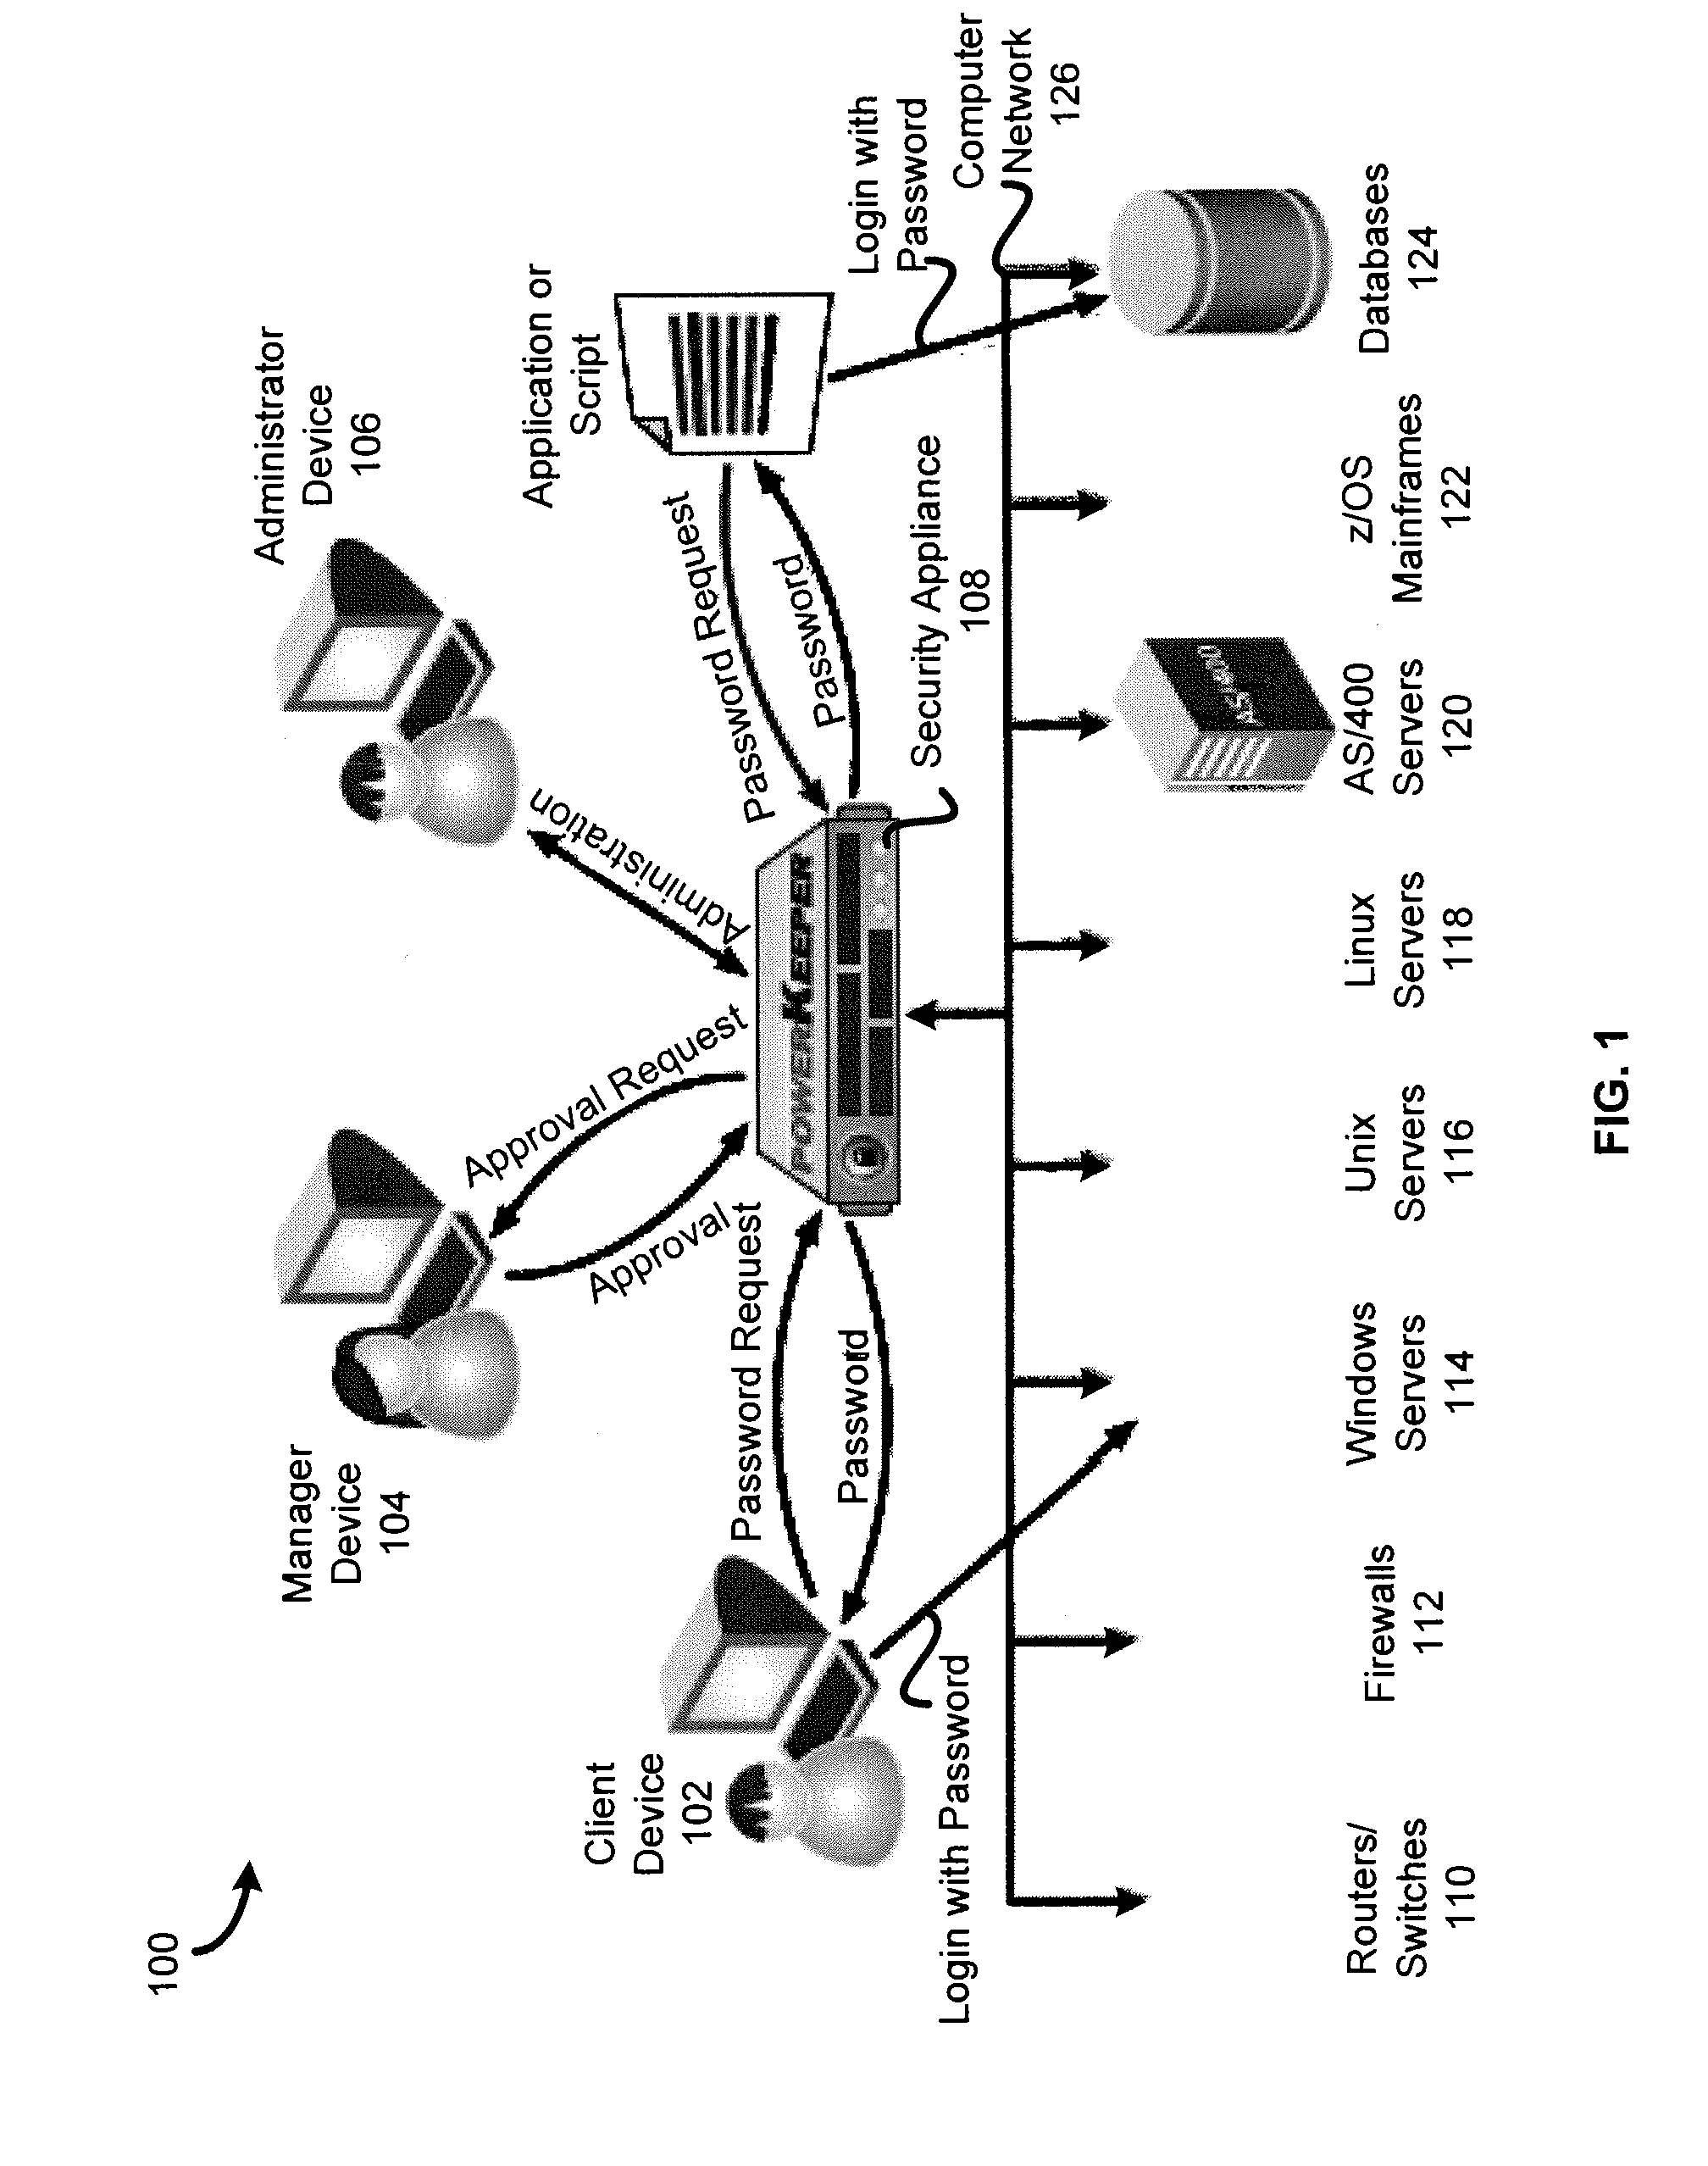 Systems and Methods for Custom Device Automatic Password Management